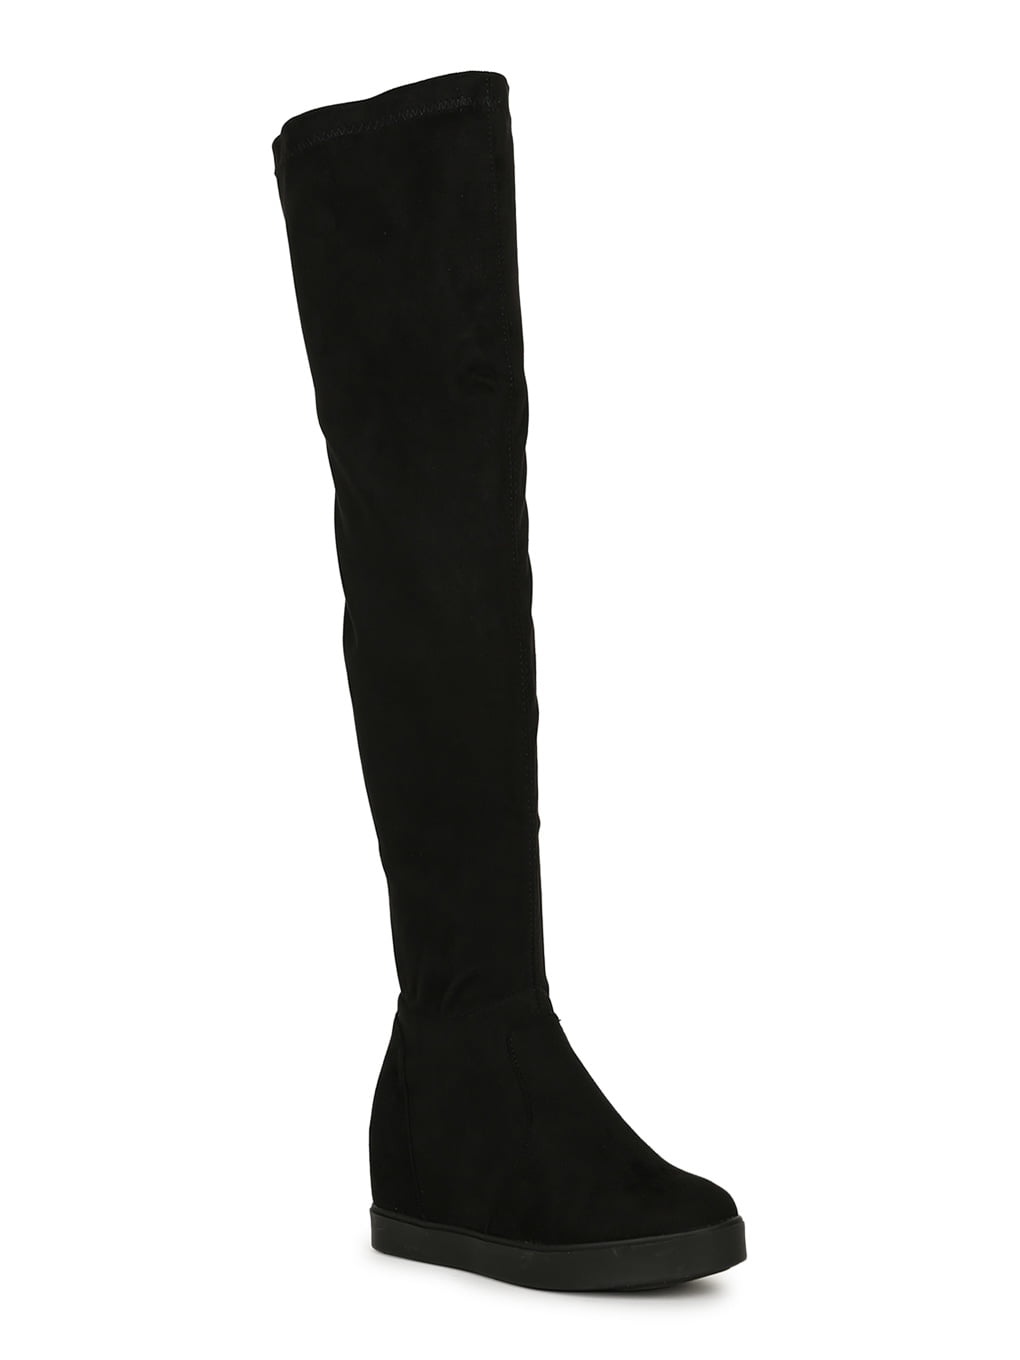 Details about   Knee High Boots Round Toe Faux Suede Womens   Casual Winter Warm Shoes Stylish##